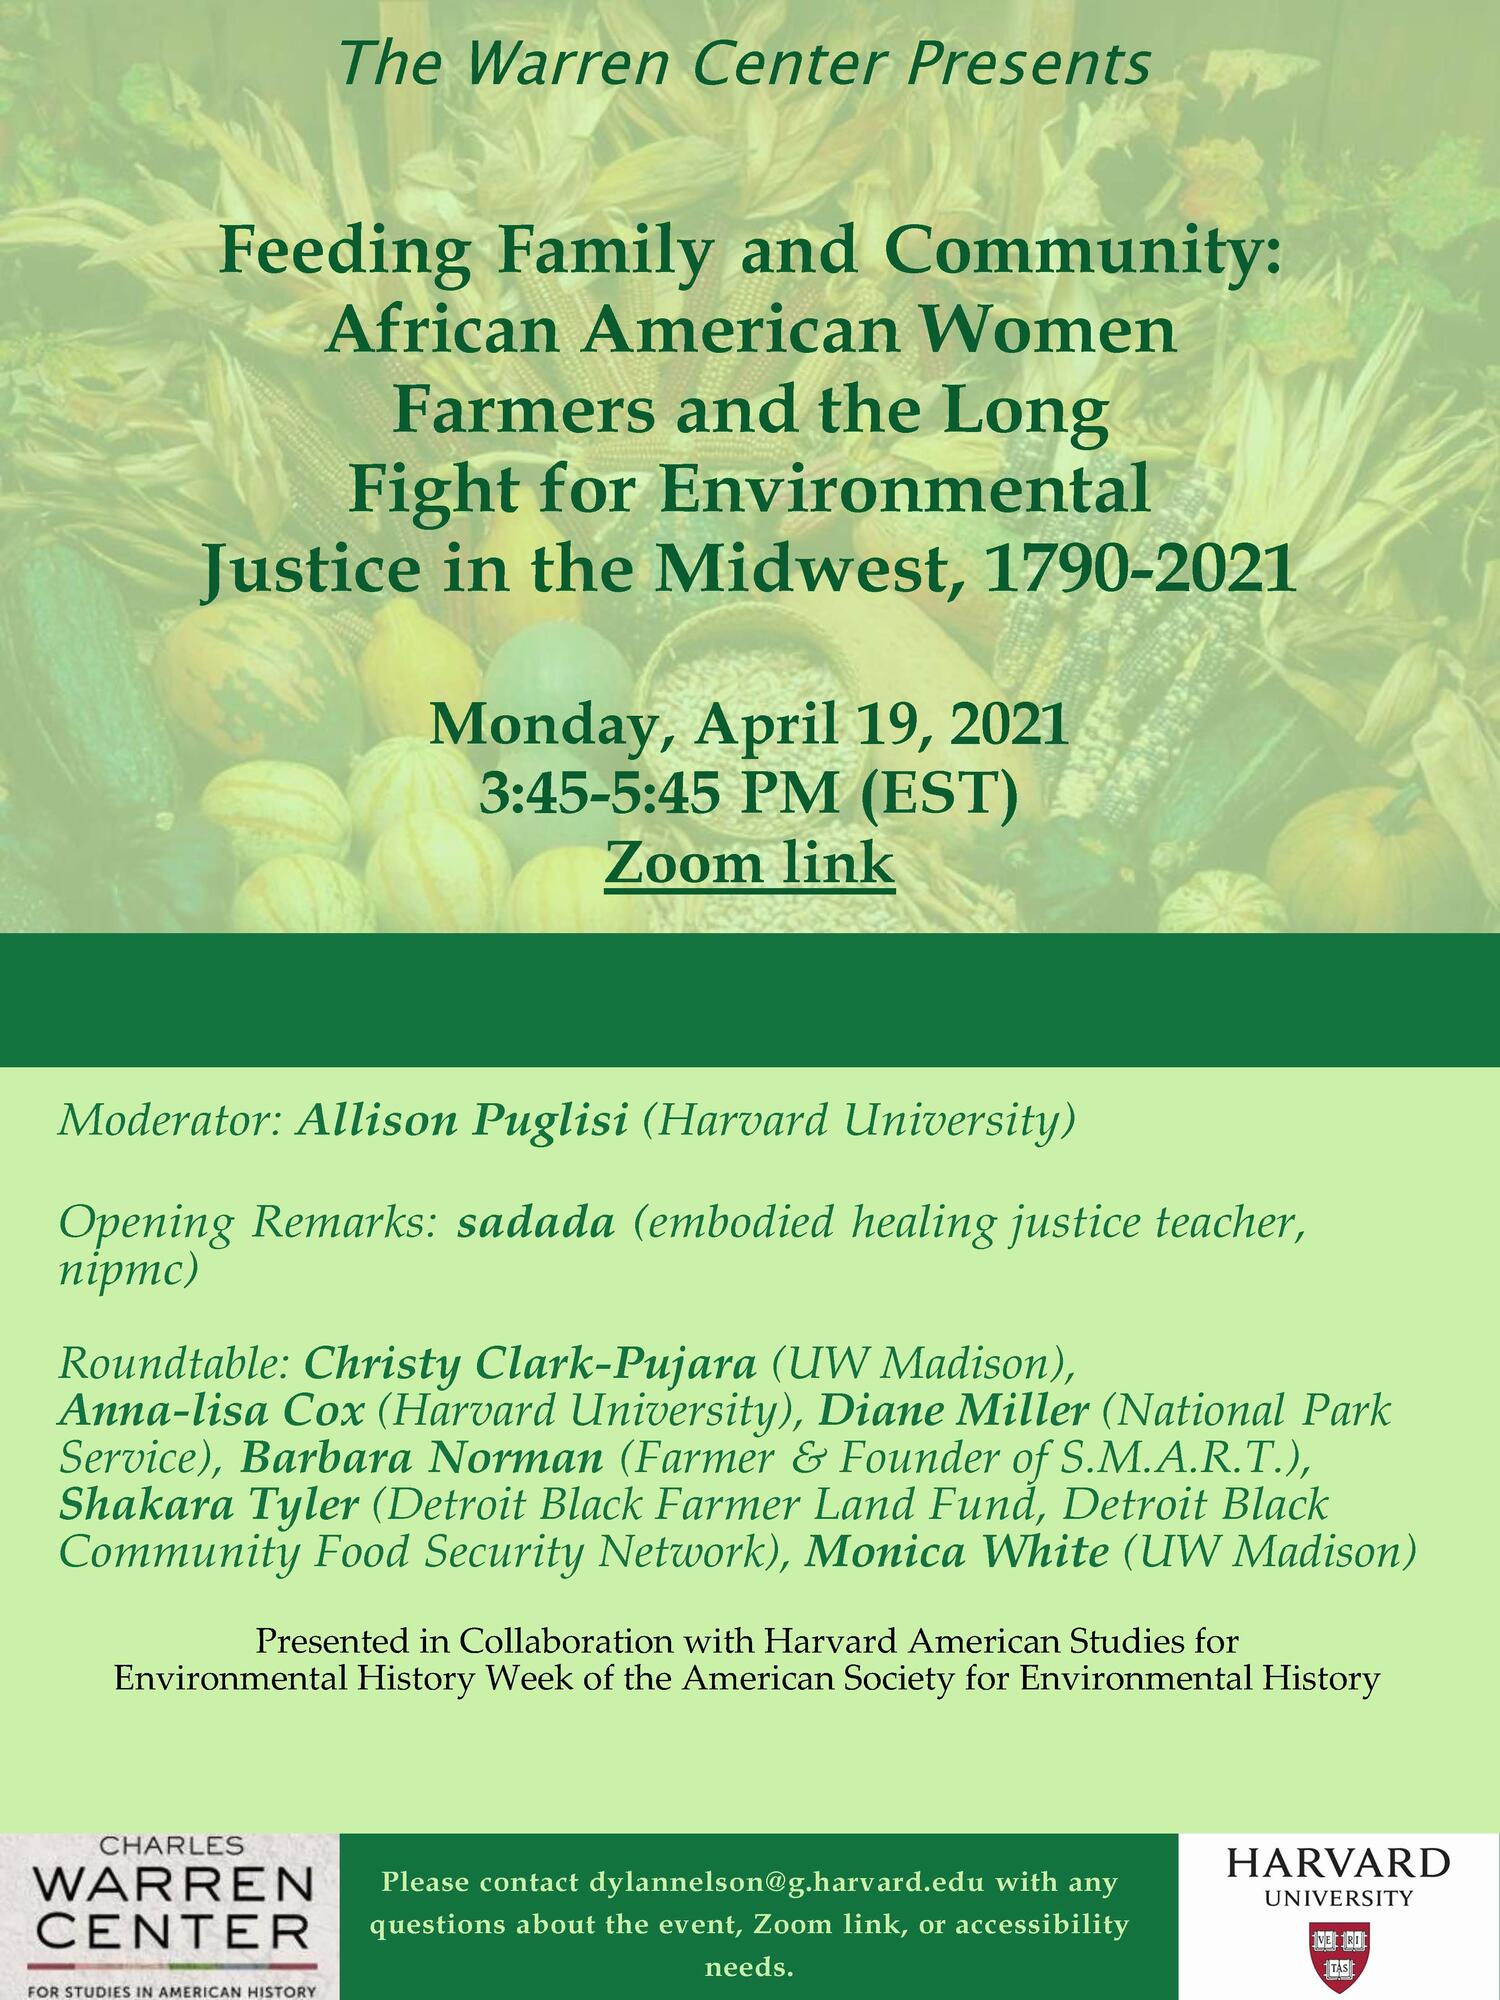 Feeding Family and Community event flyer featuring a green background with an image of a variety of vegetables gathered together.